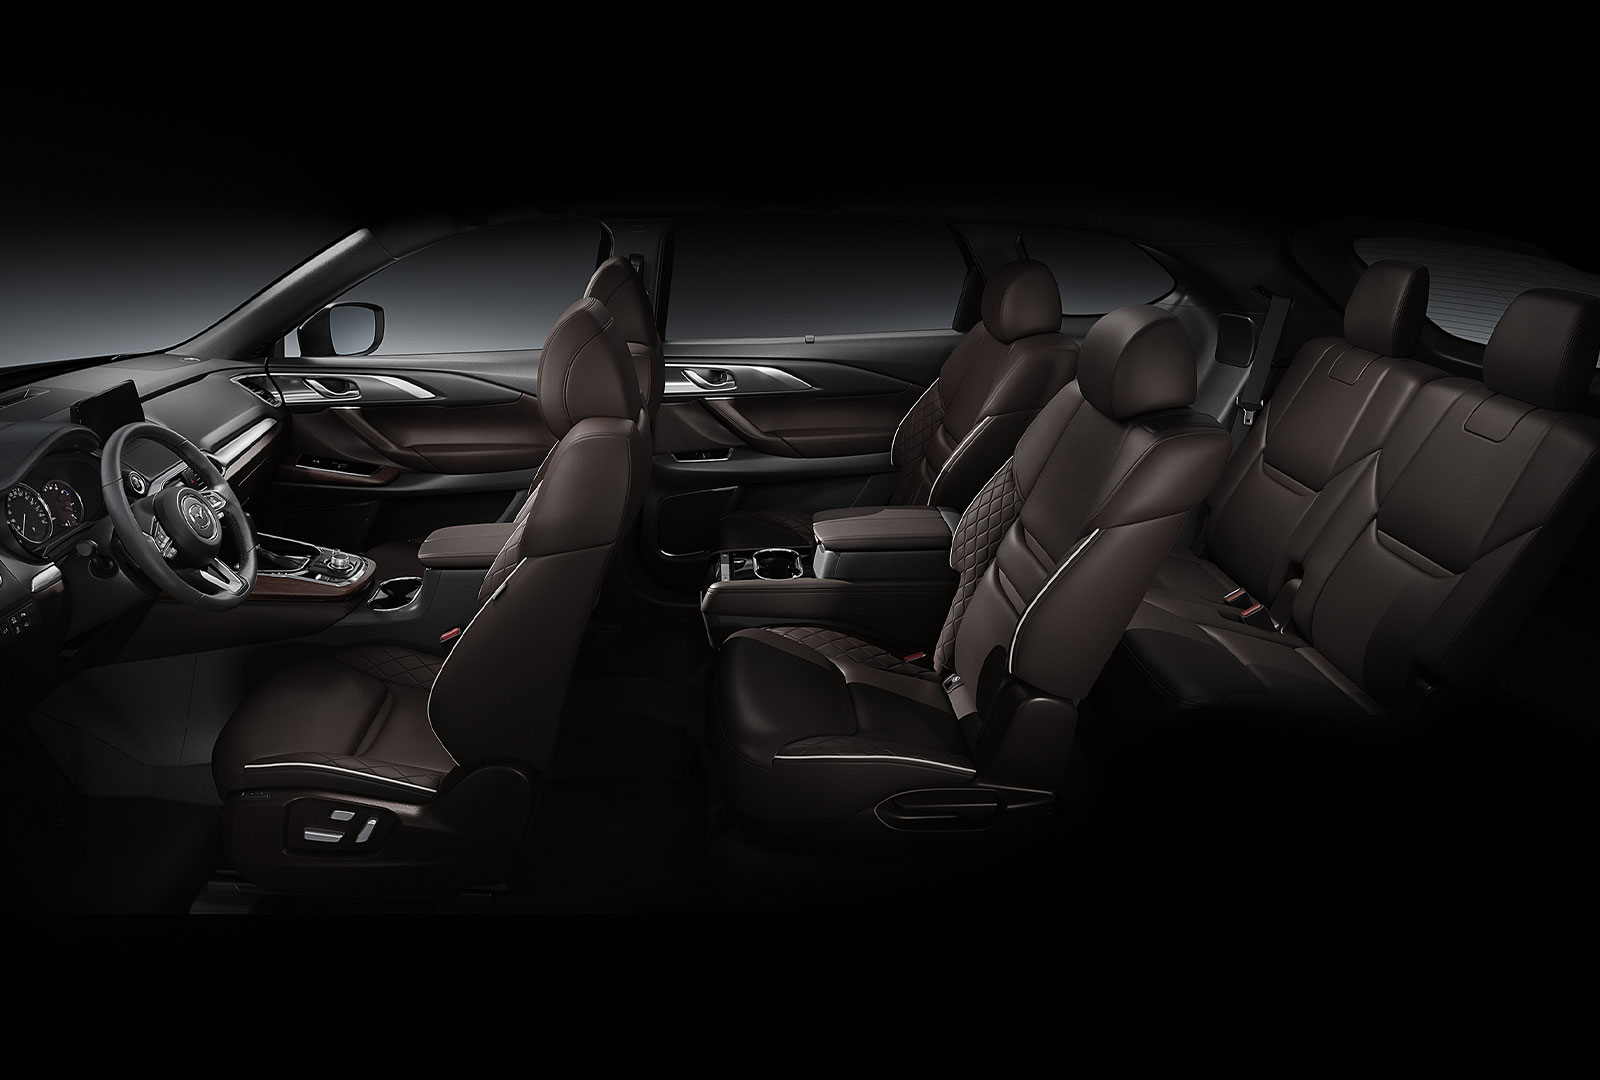 Driver side view of CX-9's interior 3-row seating.